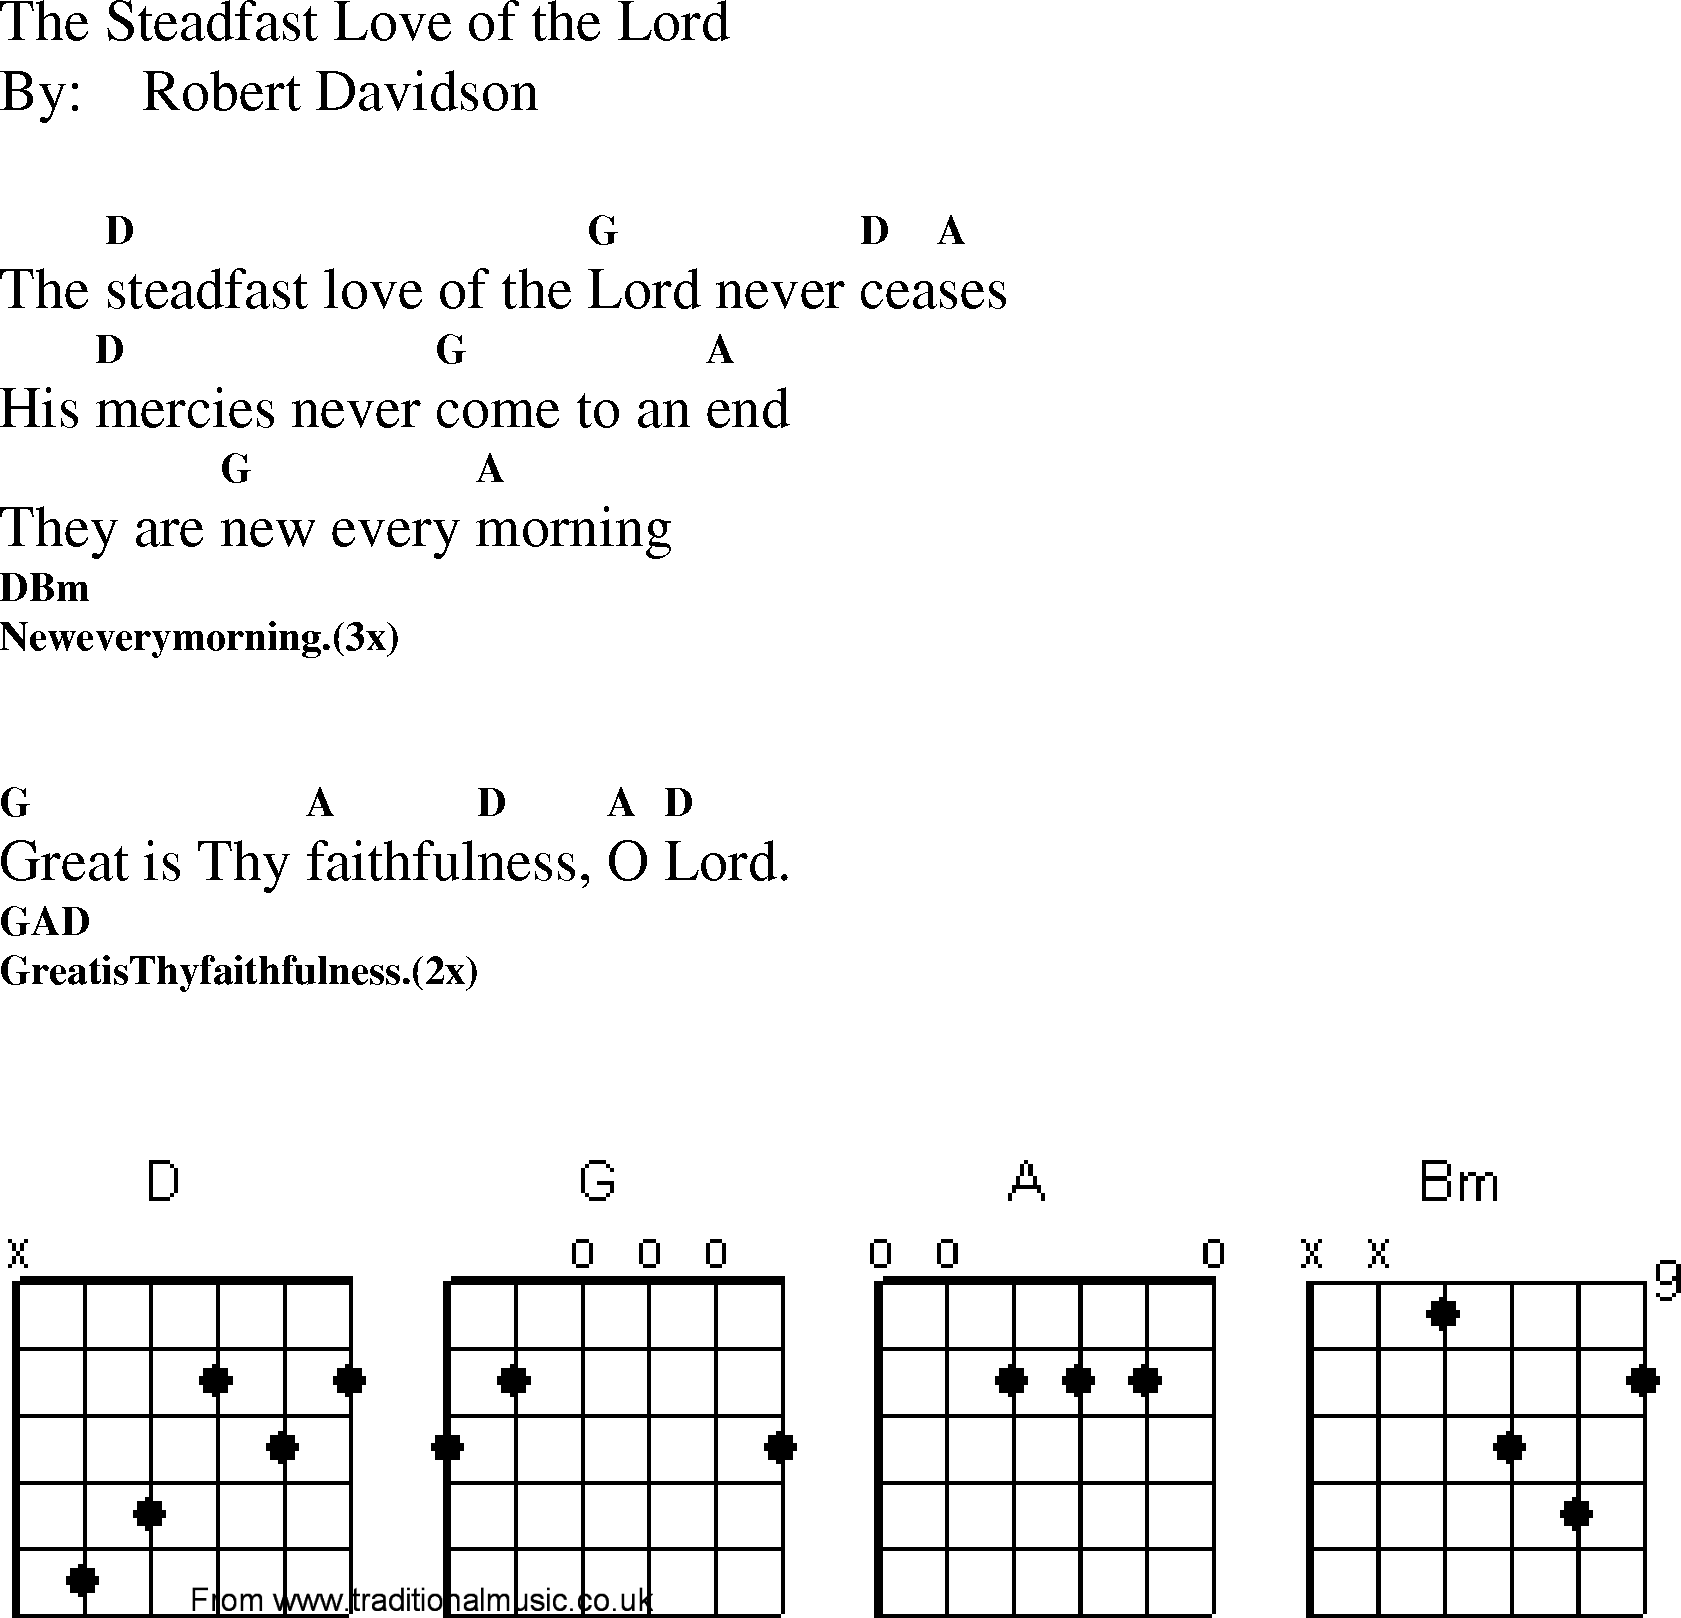 Gospel Song: the_steadfast_love_of_the_lord, lyrics and chords.